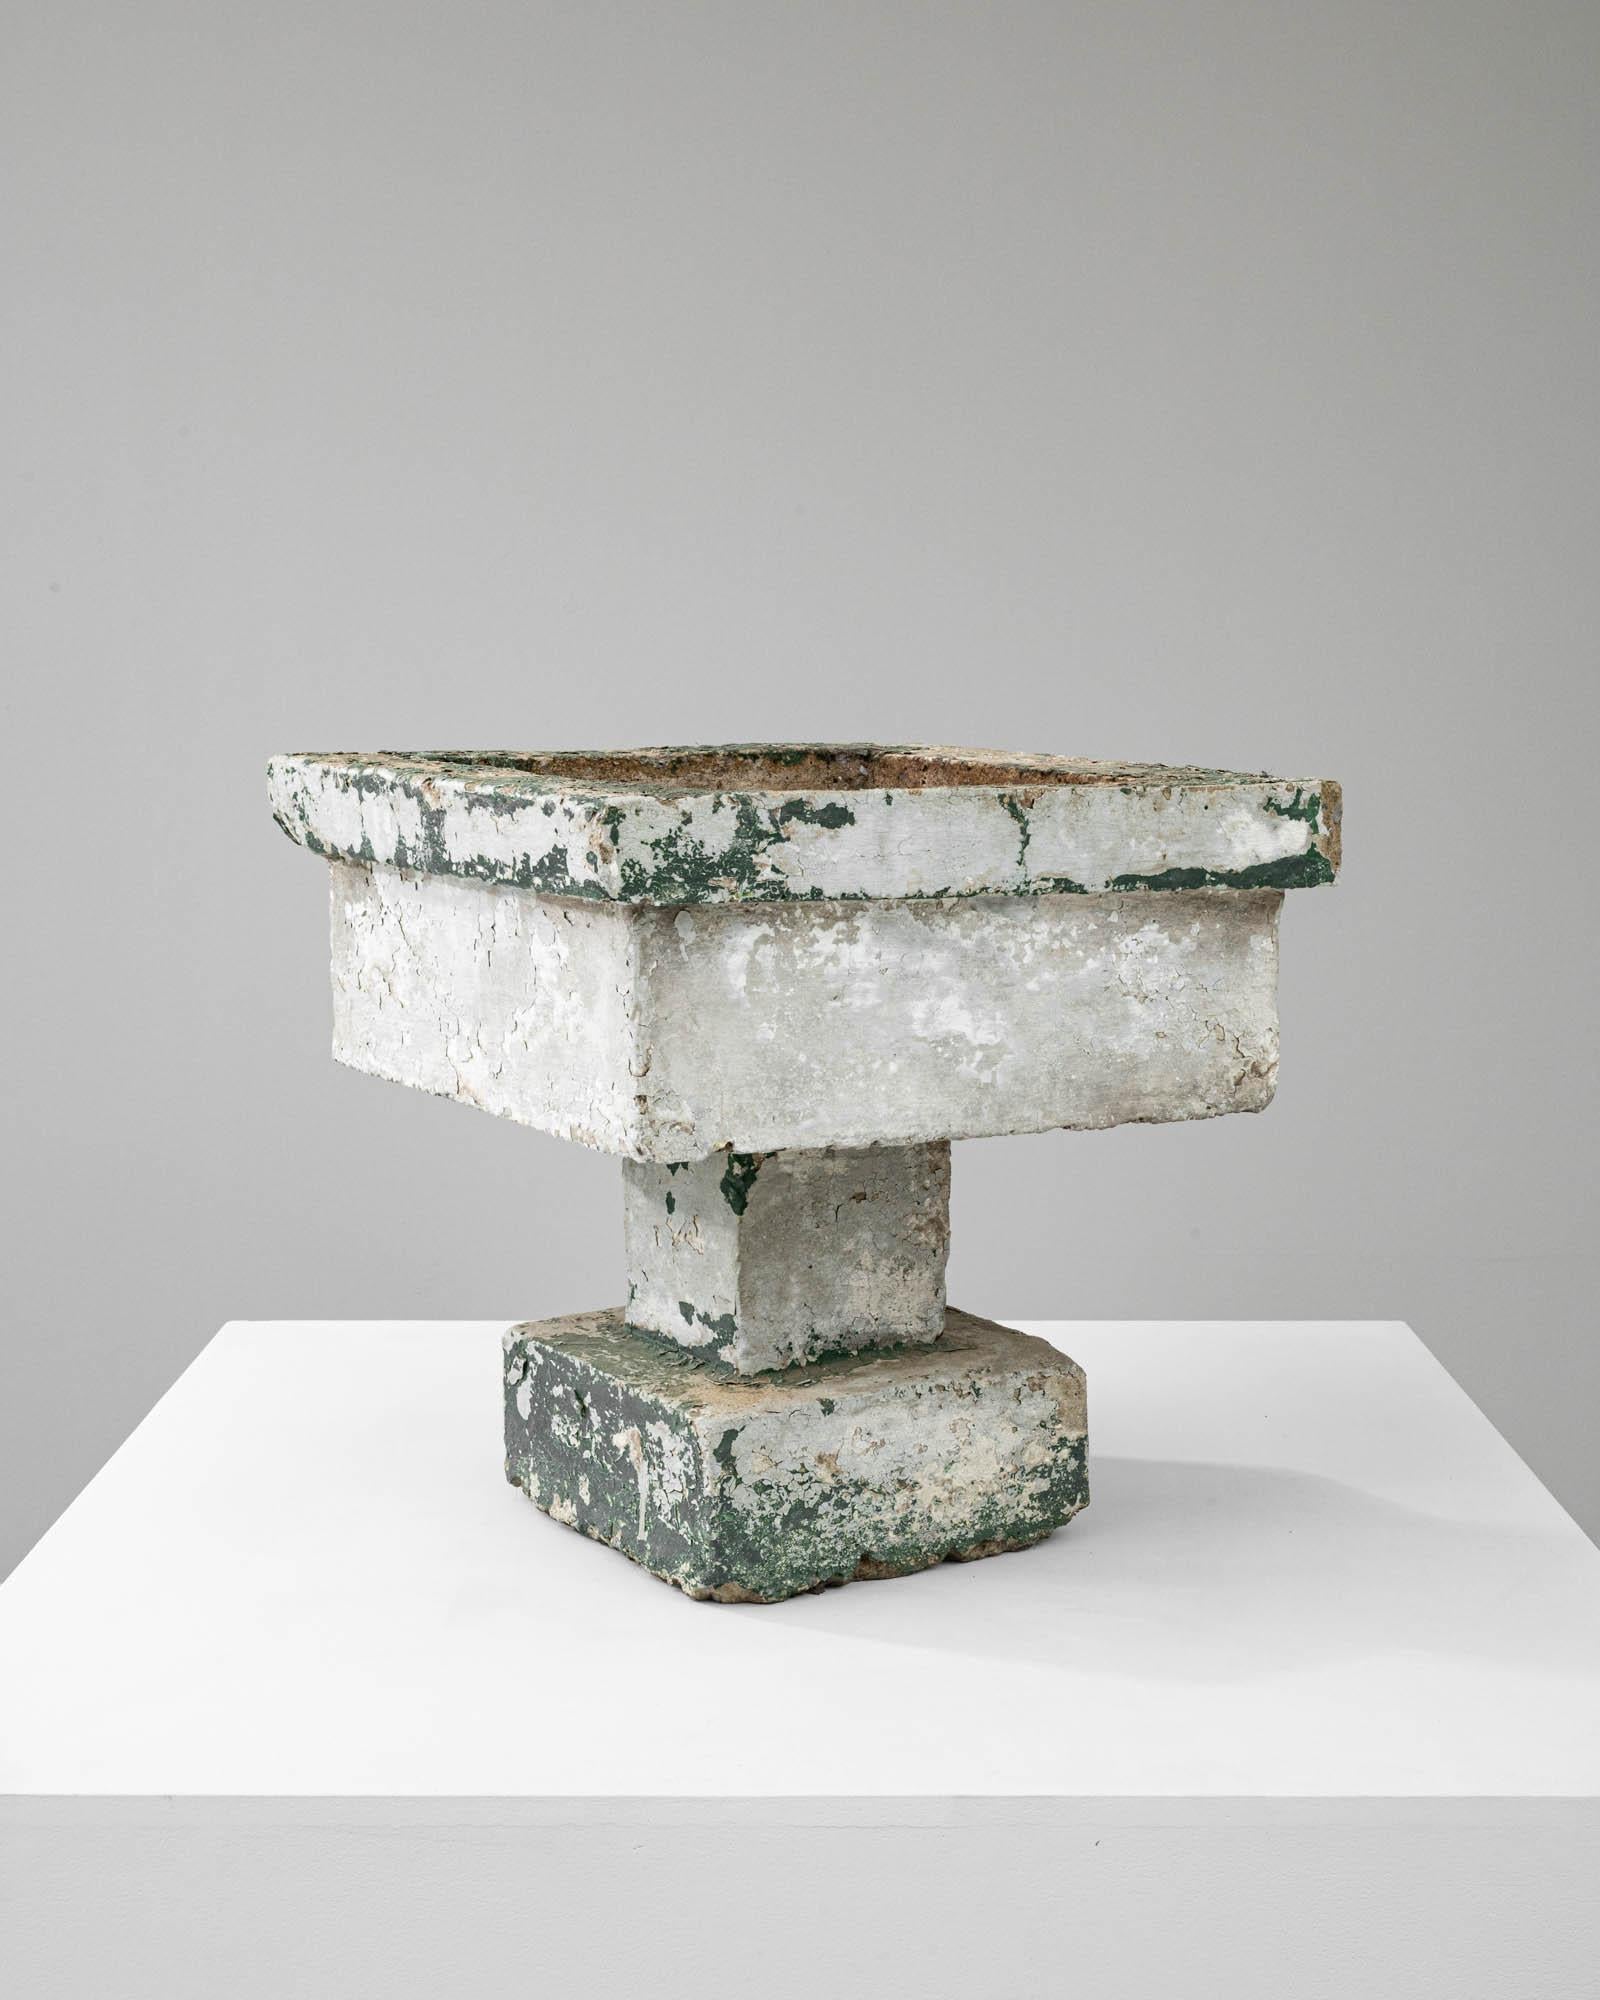 This early 20th Century French Concrete Planter exudes the raw, unrefined beauty of utilitarian design, transformed by time into a work of art. The planter, with its weathered texture and remnants of green paint, possesses a unique character that